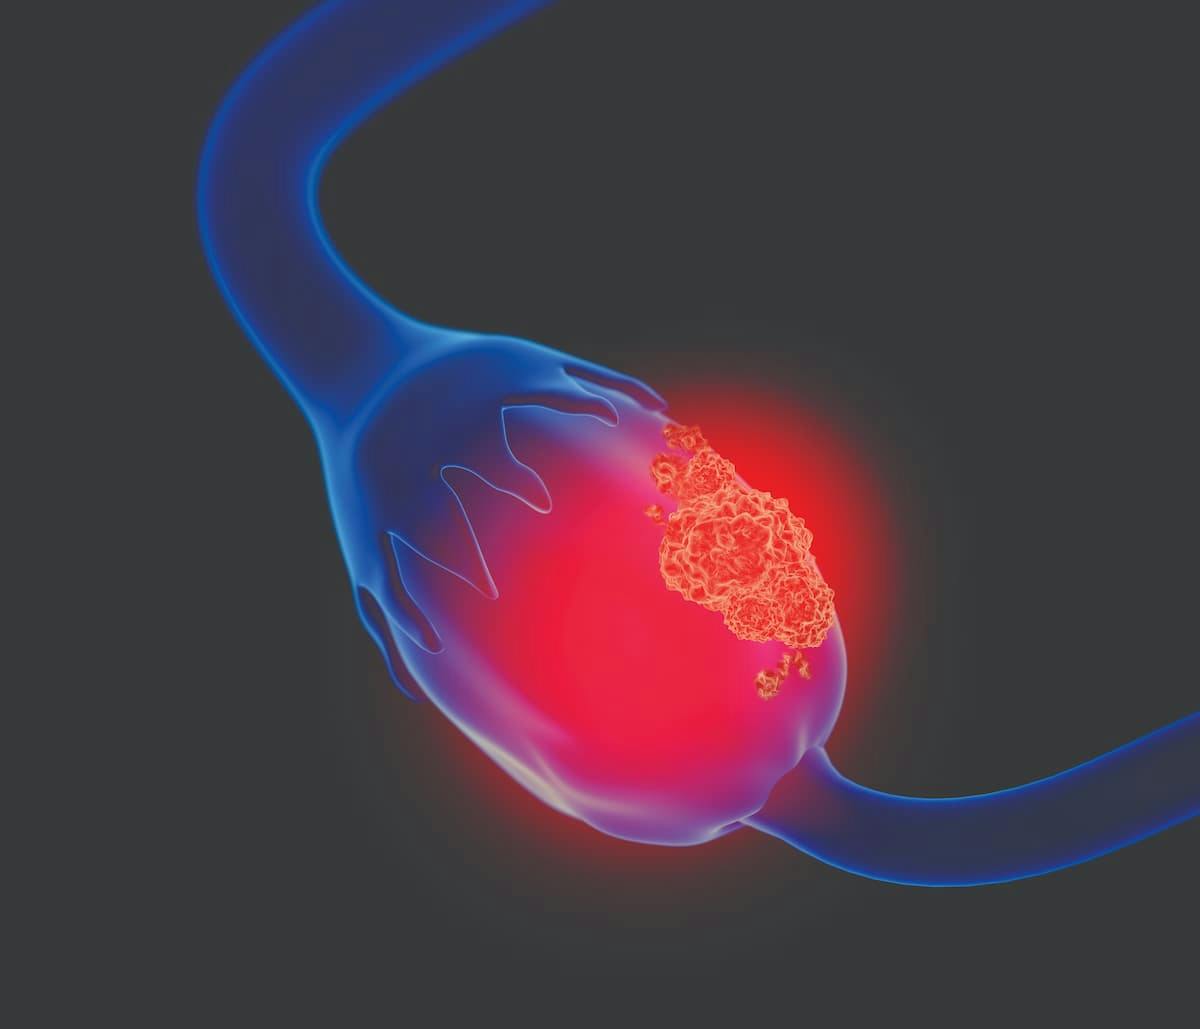 Findings from the phase 3 NORA study identified a numerically longer median overall survival among patients with platinum-sensitive recurrent ovarian cancer treated with maintenance niraparib regardless of BRCA mutation status.